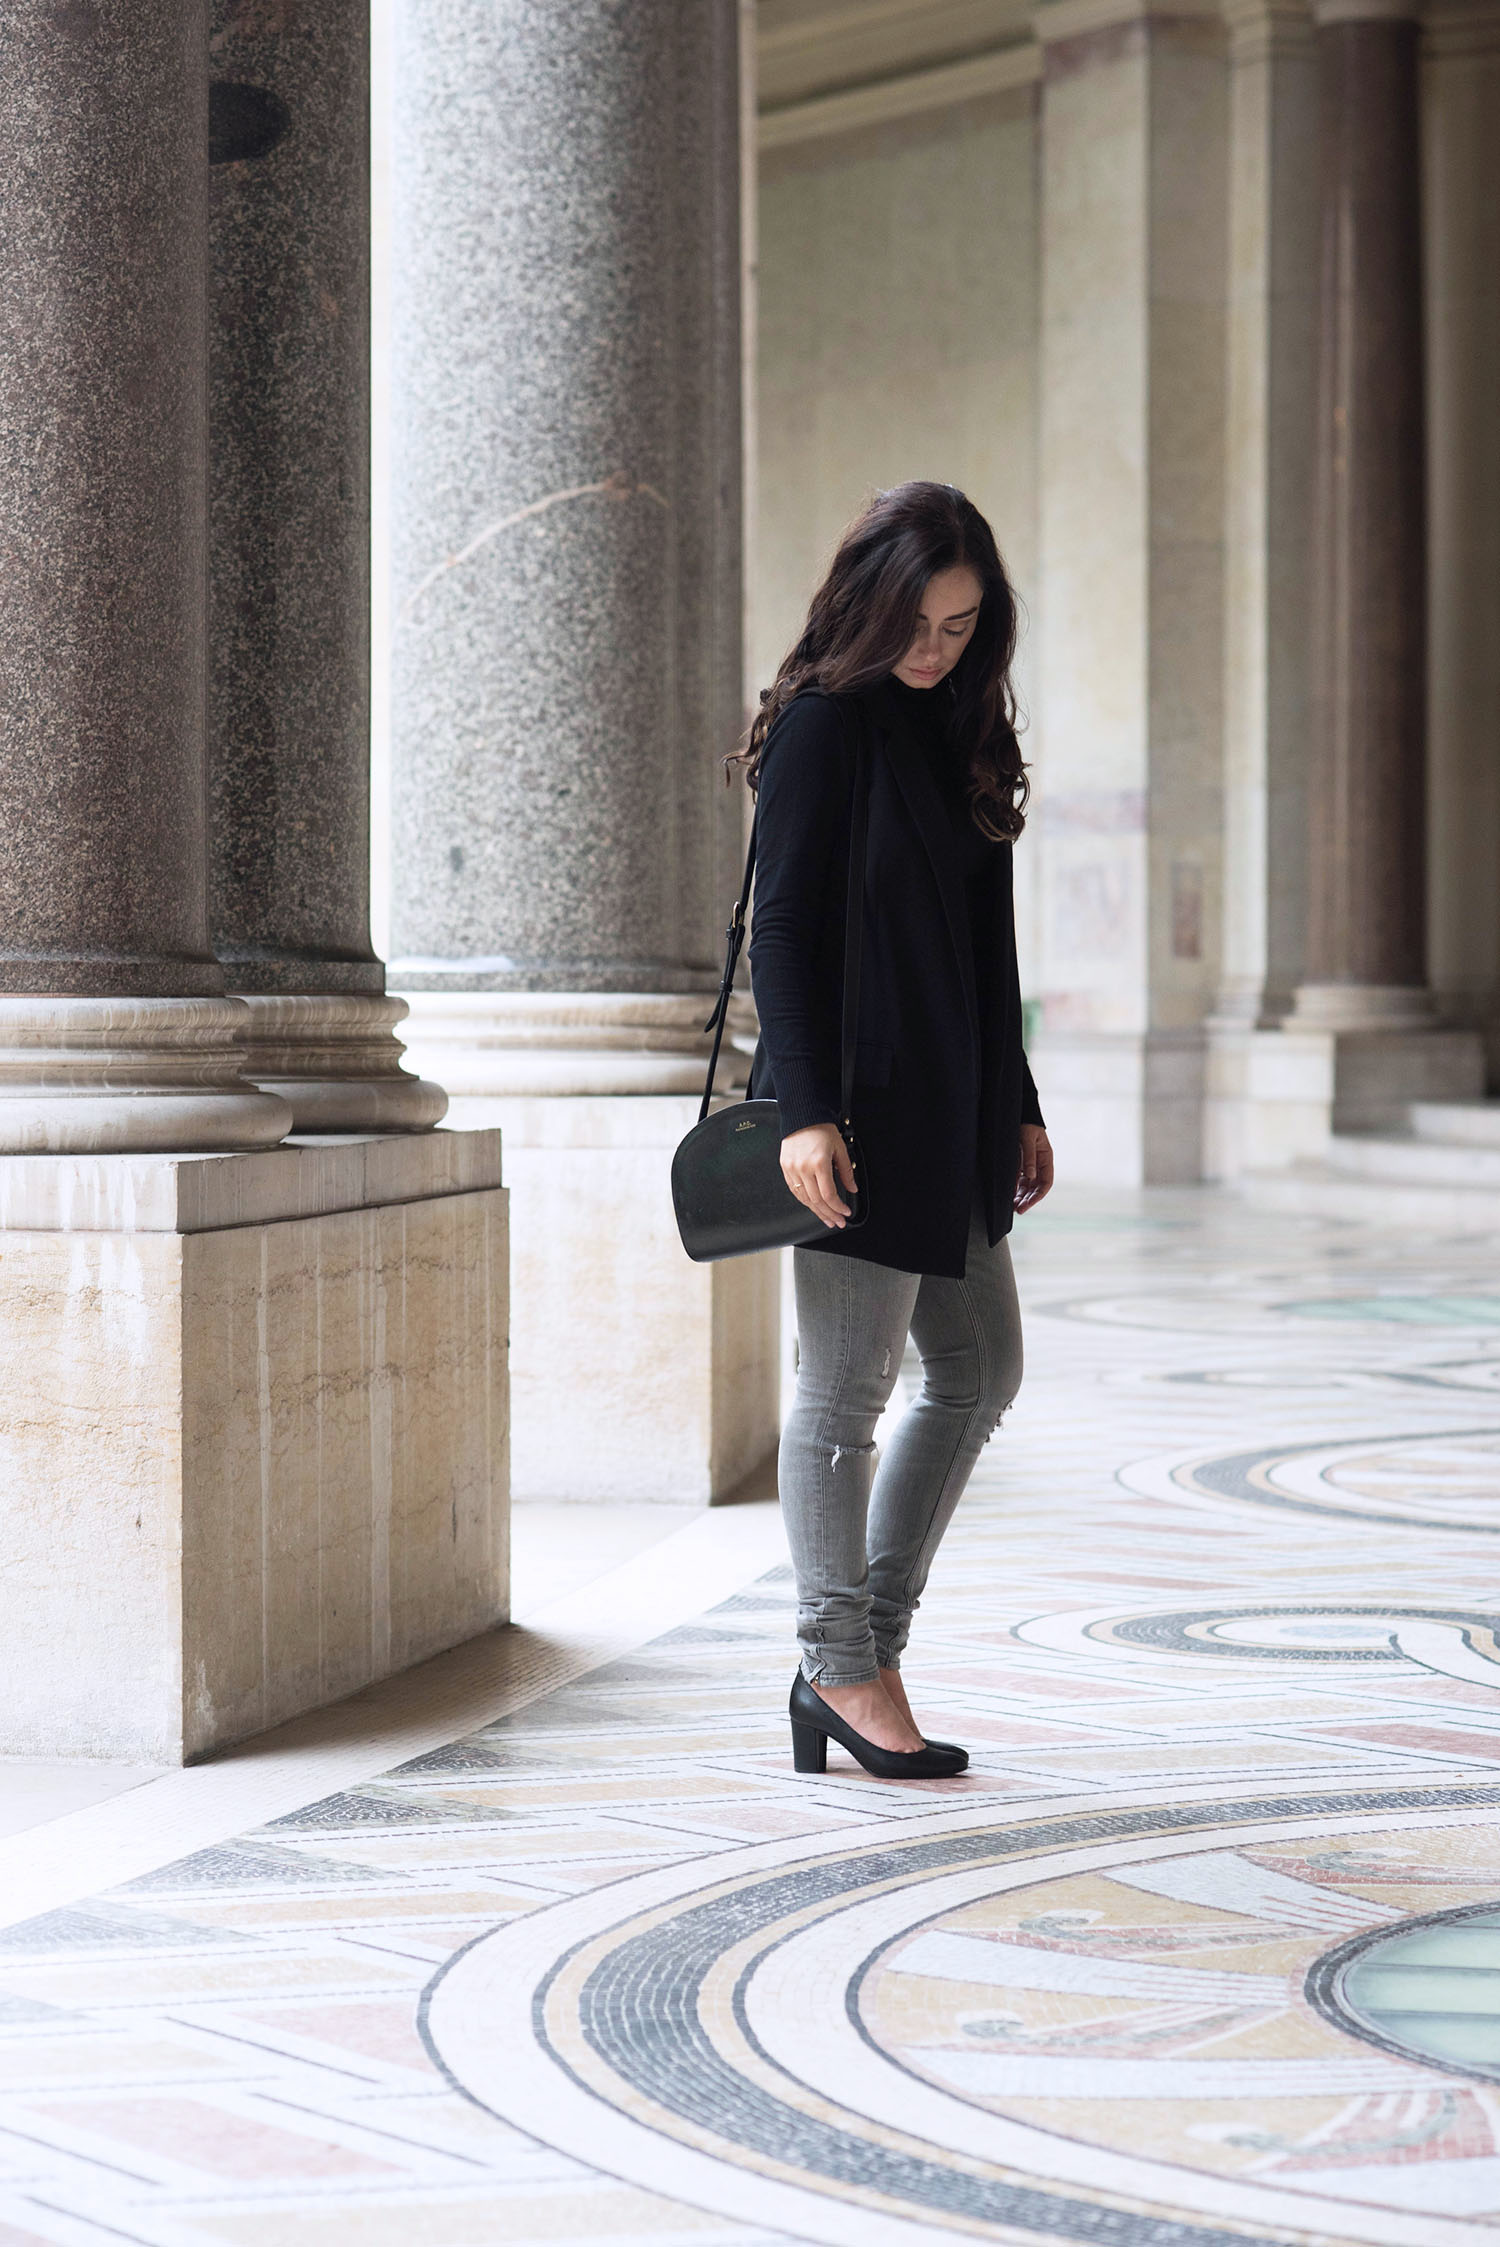 Fashion blogger Cee Fardoe of Coco & Vera stands in the Petit Palais in Paris wearing Raye the Label block heels and Zara grey jeans